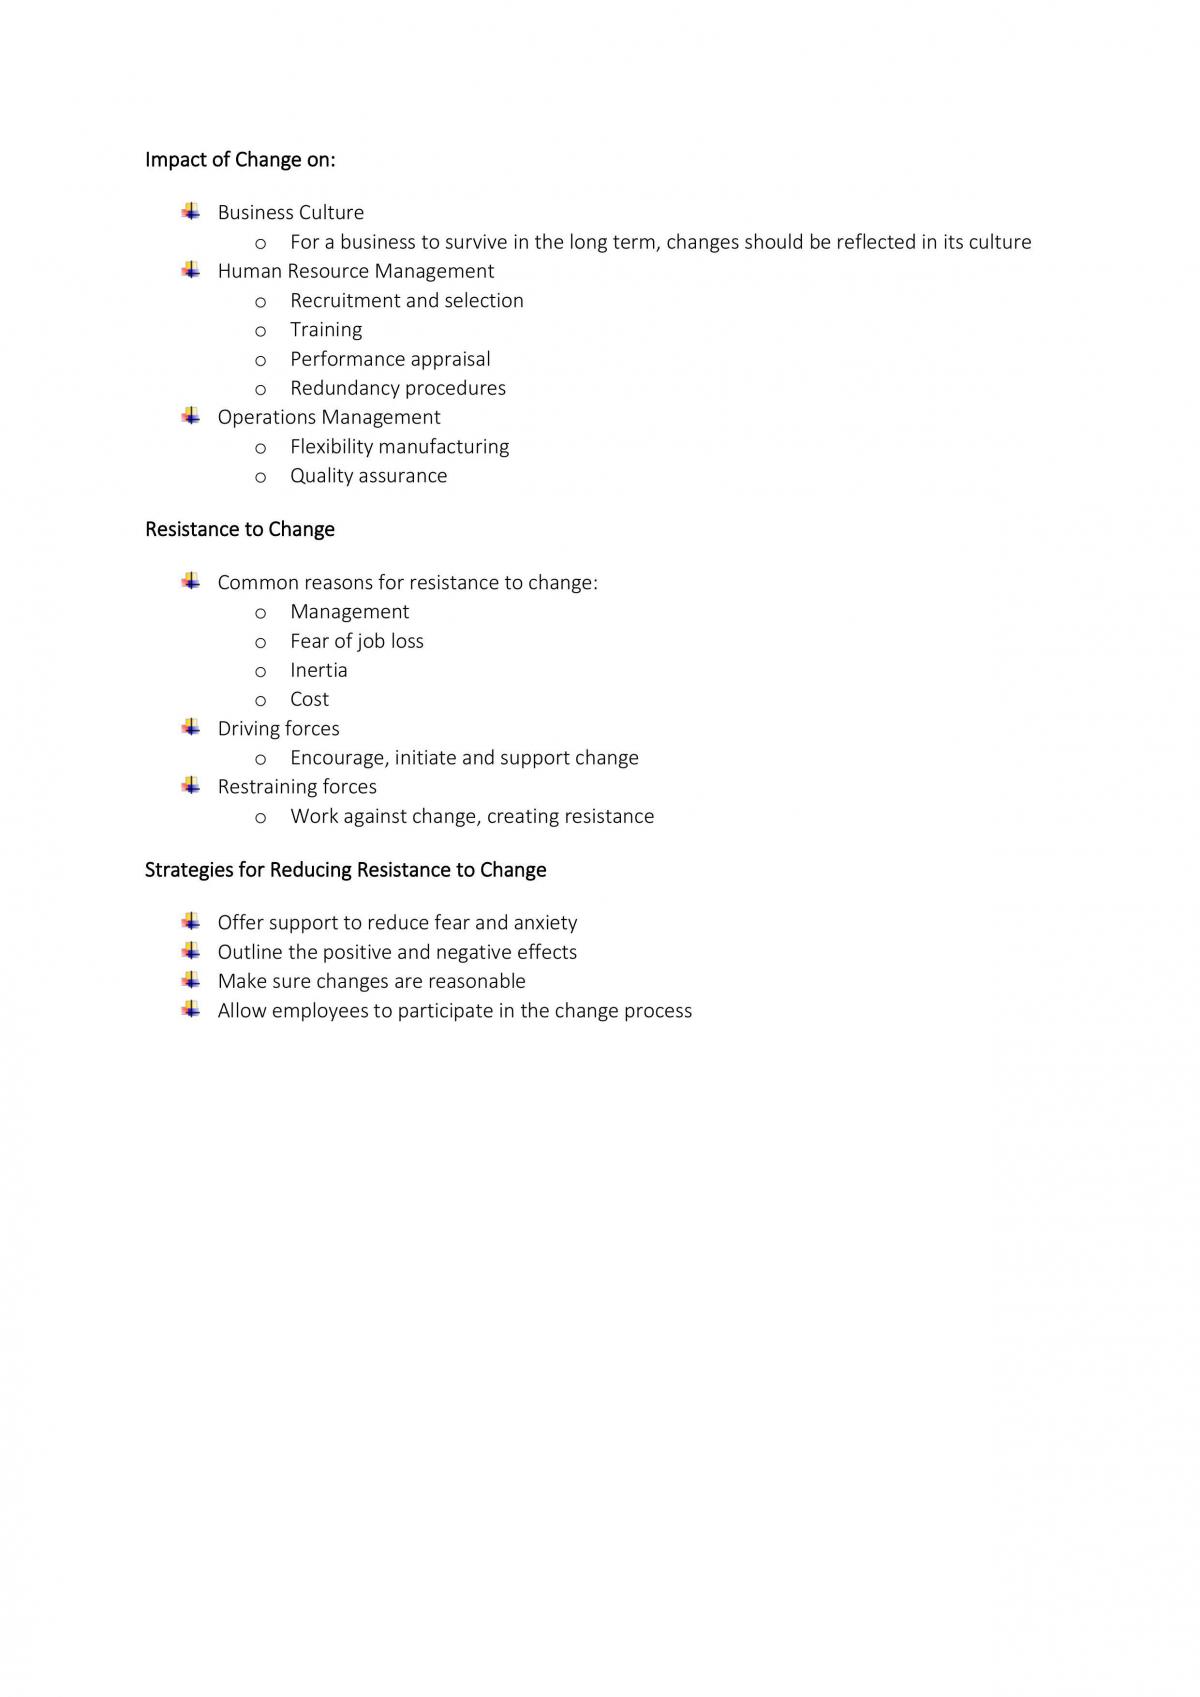 Preliminary Business Studies Notes - Page 24